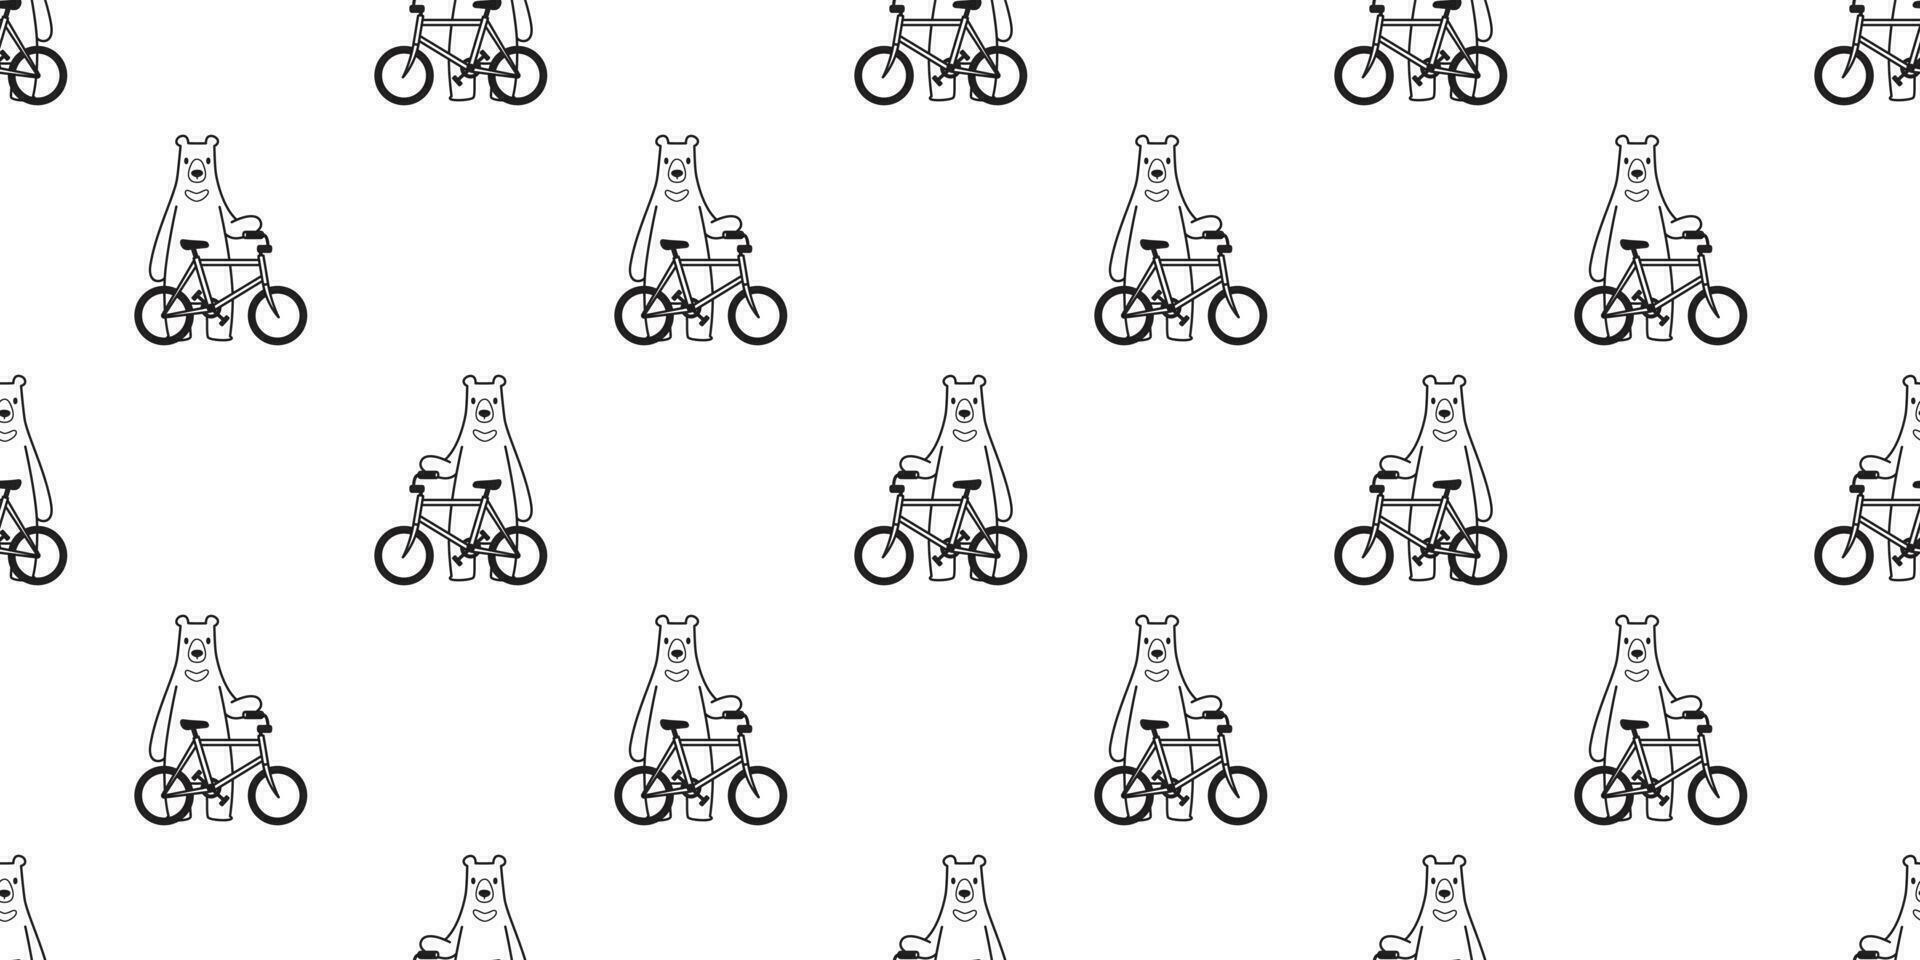 Bear seamless pattern vector polar bear bicycle riding cycling cartoon scarf isolated illustration tile background repeat wallpaper